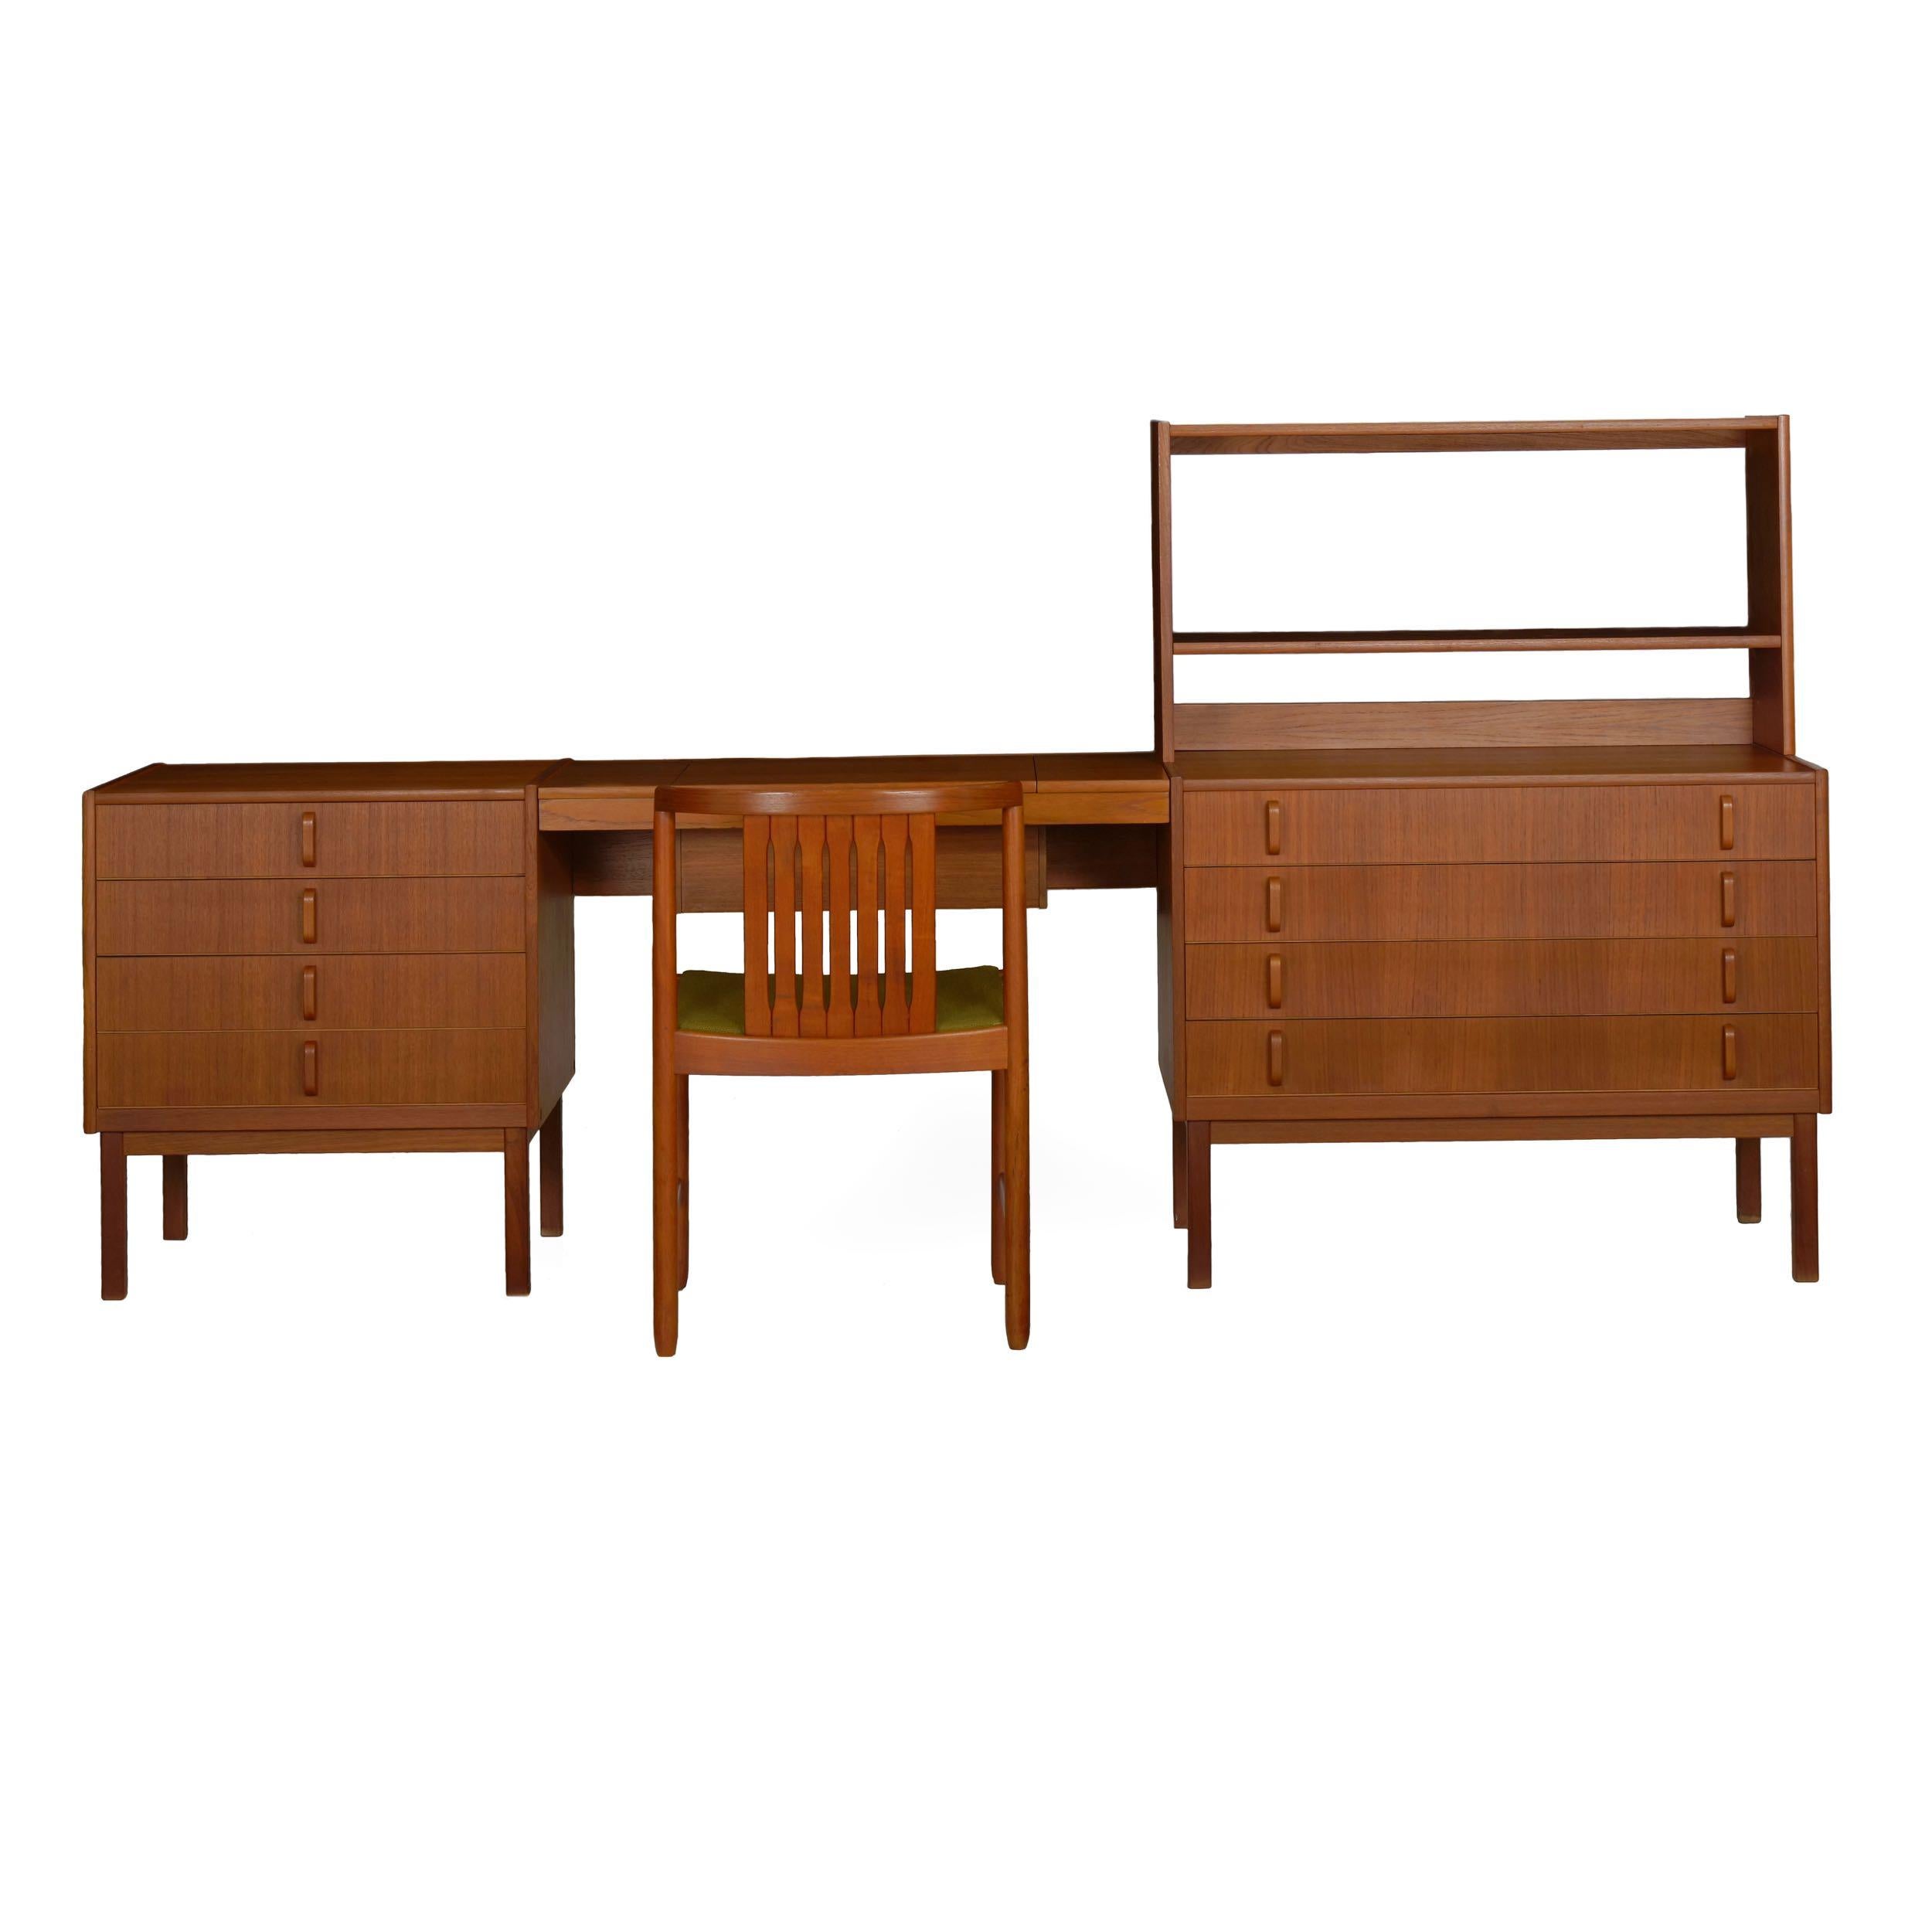 Designed by Bertil Fridhagen and manufactured by Bodafors in Sweden, this bedroom dressing set remains in nearly impeccable condition from when it was first acquired in 1964-1965 from Scandinavian Design in New York by an interior designer. The